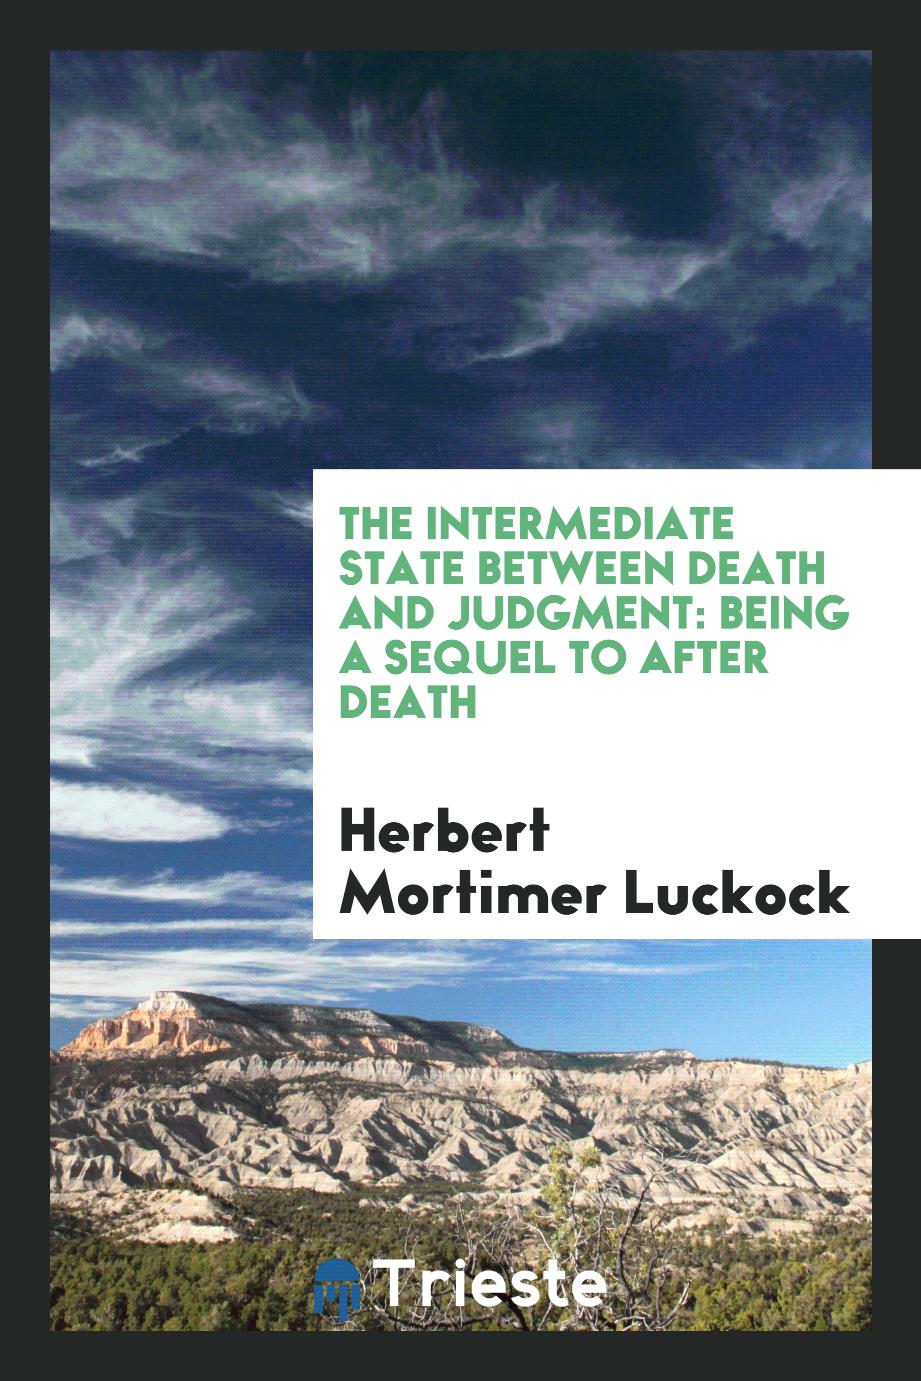 The Intermediate State between Death and Judgment: Being a Sequel to after Death